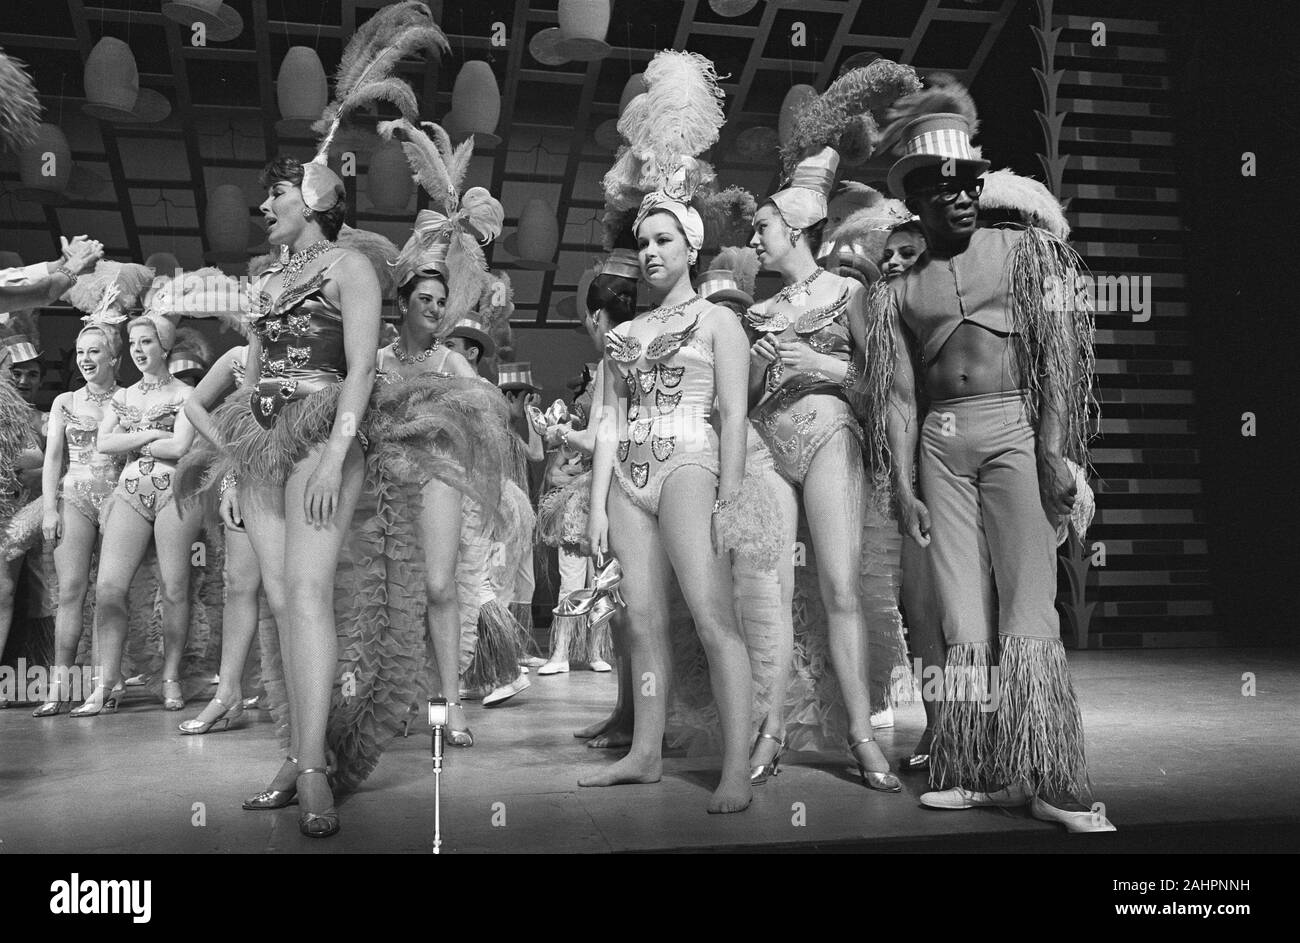 Rehearsal Snip and Snap. Dancers from the Schleswig Revue Date June 27, 1963 Stock Photo